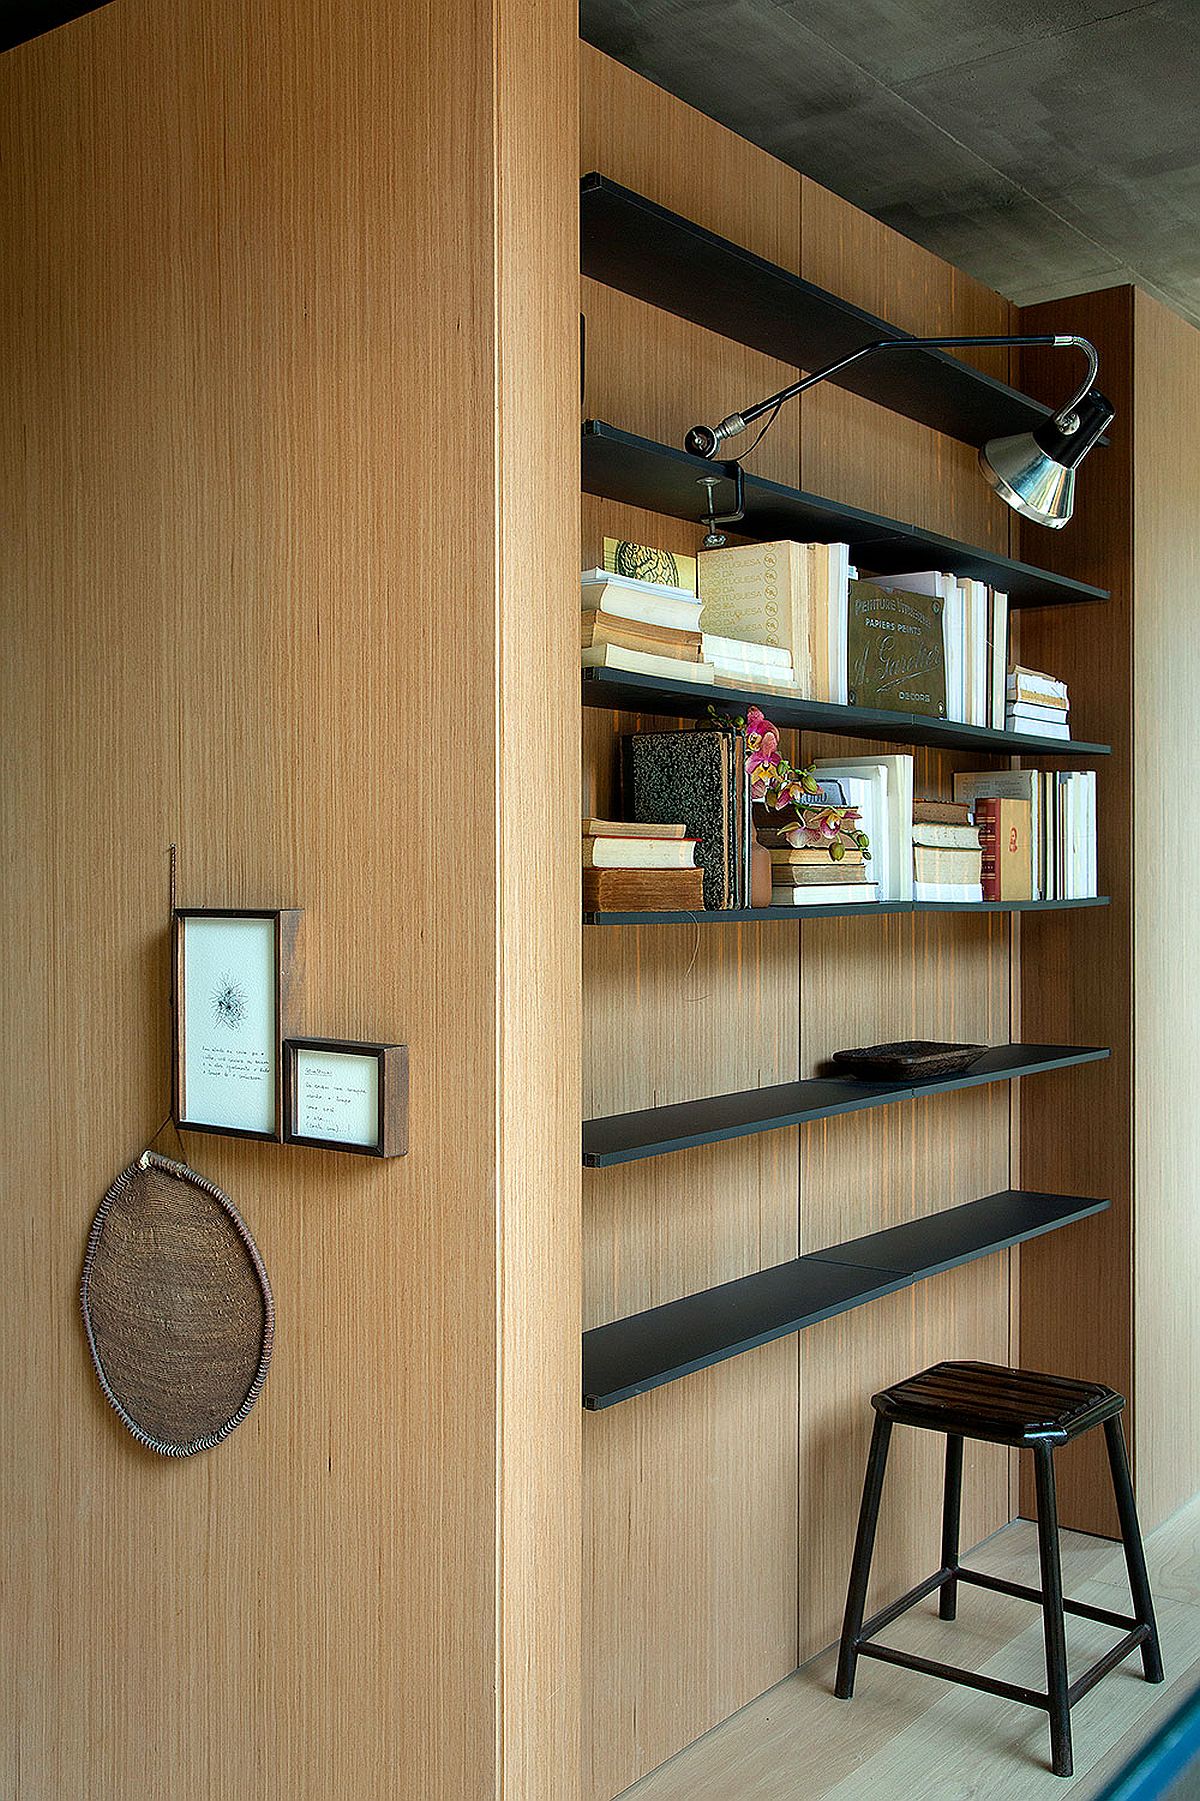 Using slim, floating shelves inside the wardrobe create a smart workspace in the bedroom